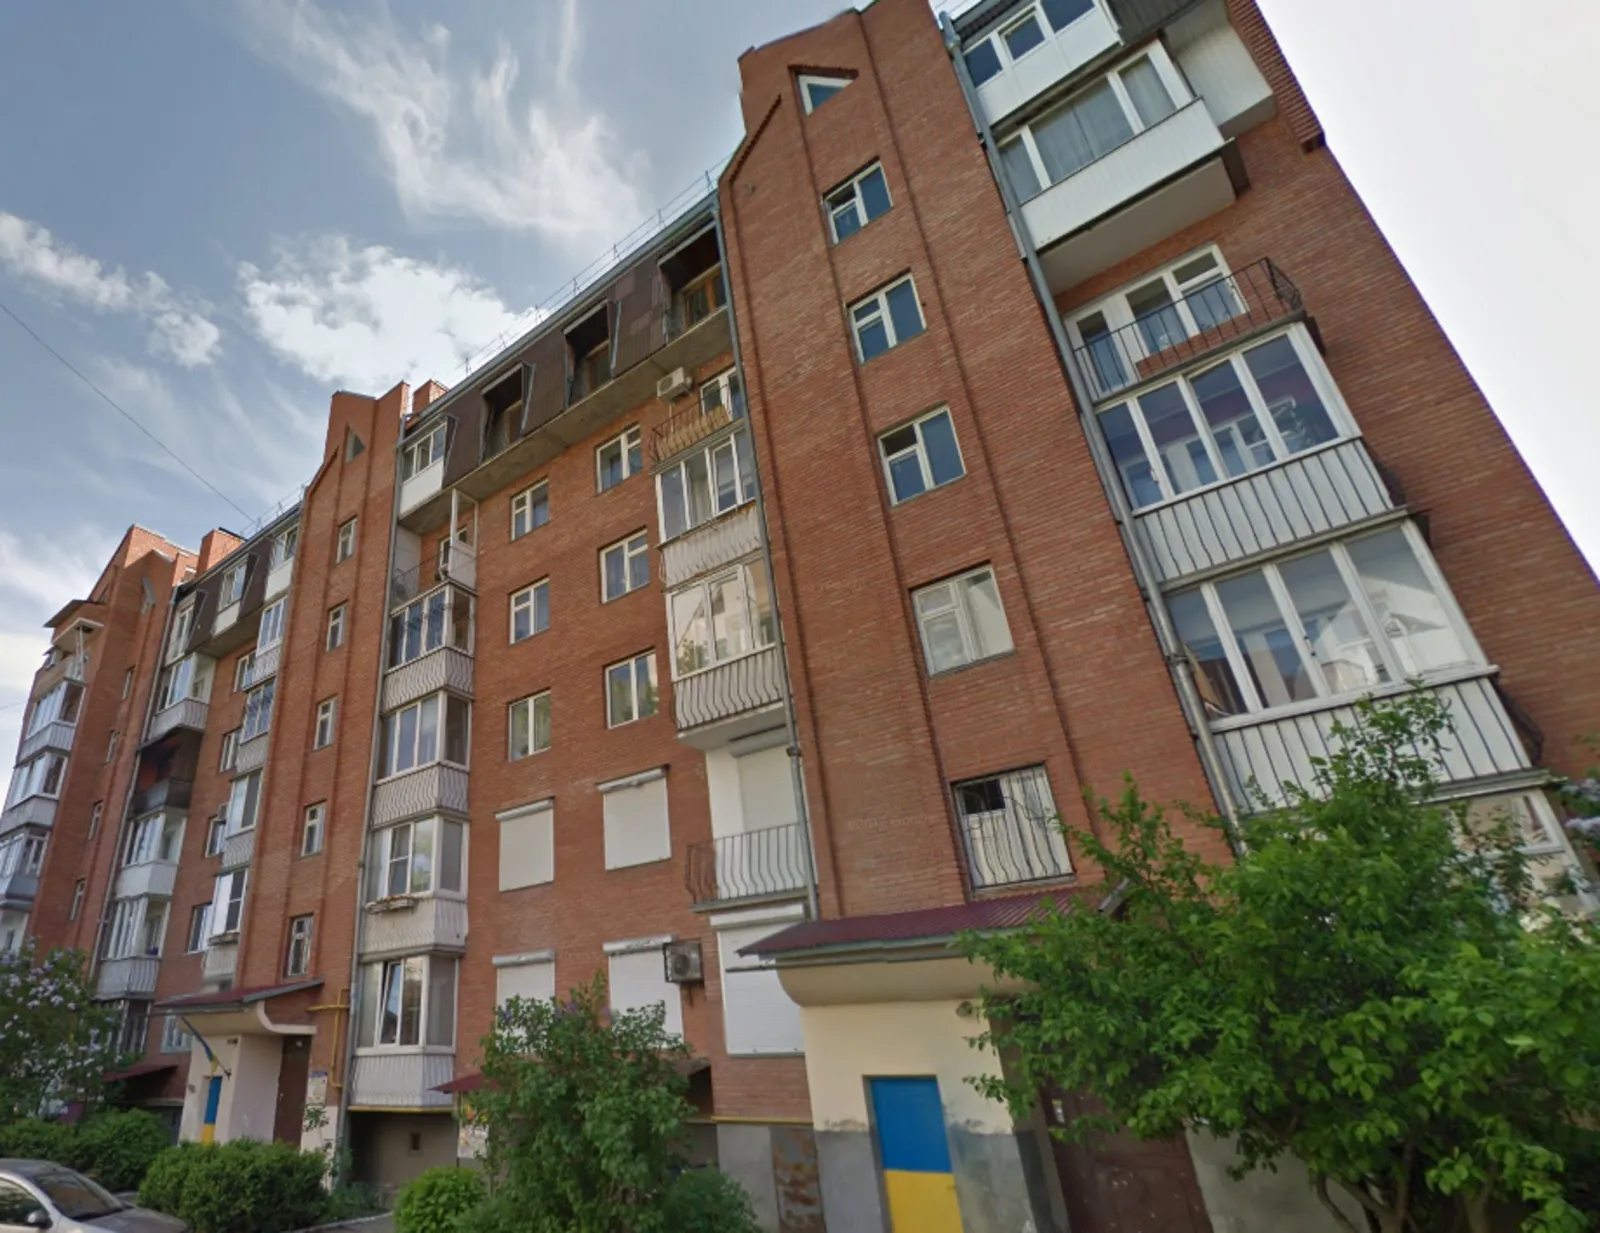 Apartments for sale. 2 rooms, 75 m², 2nd floor/7 floors. Tsentr, Ternopil. 